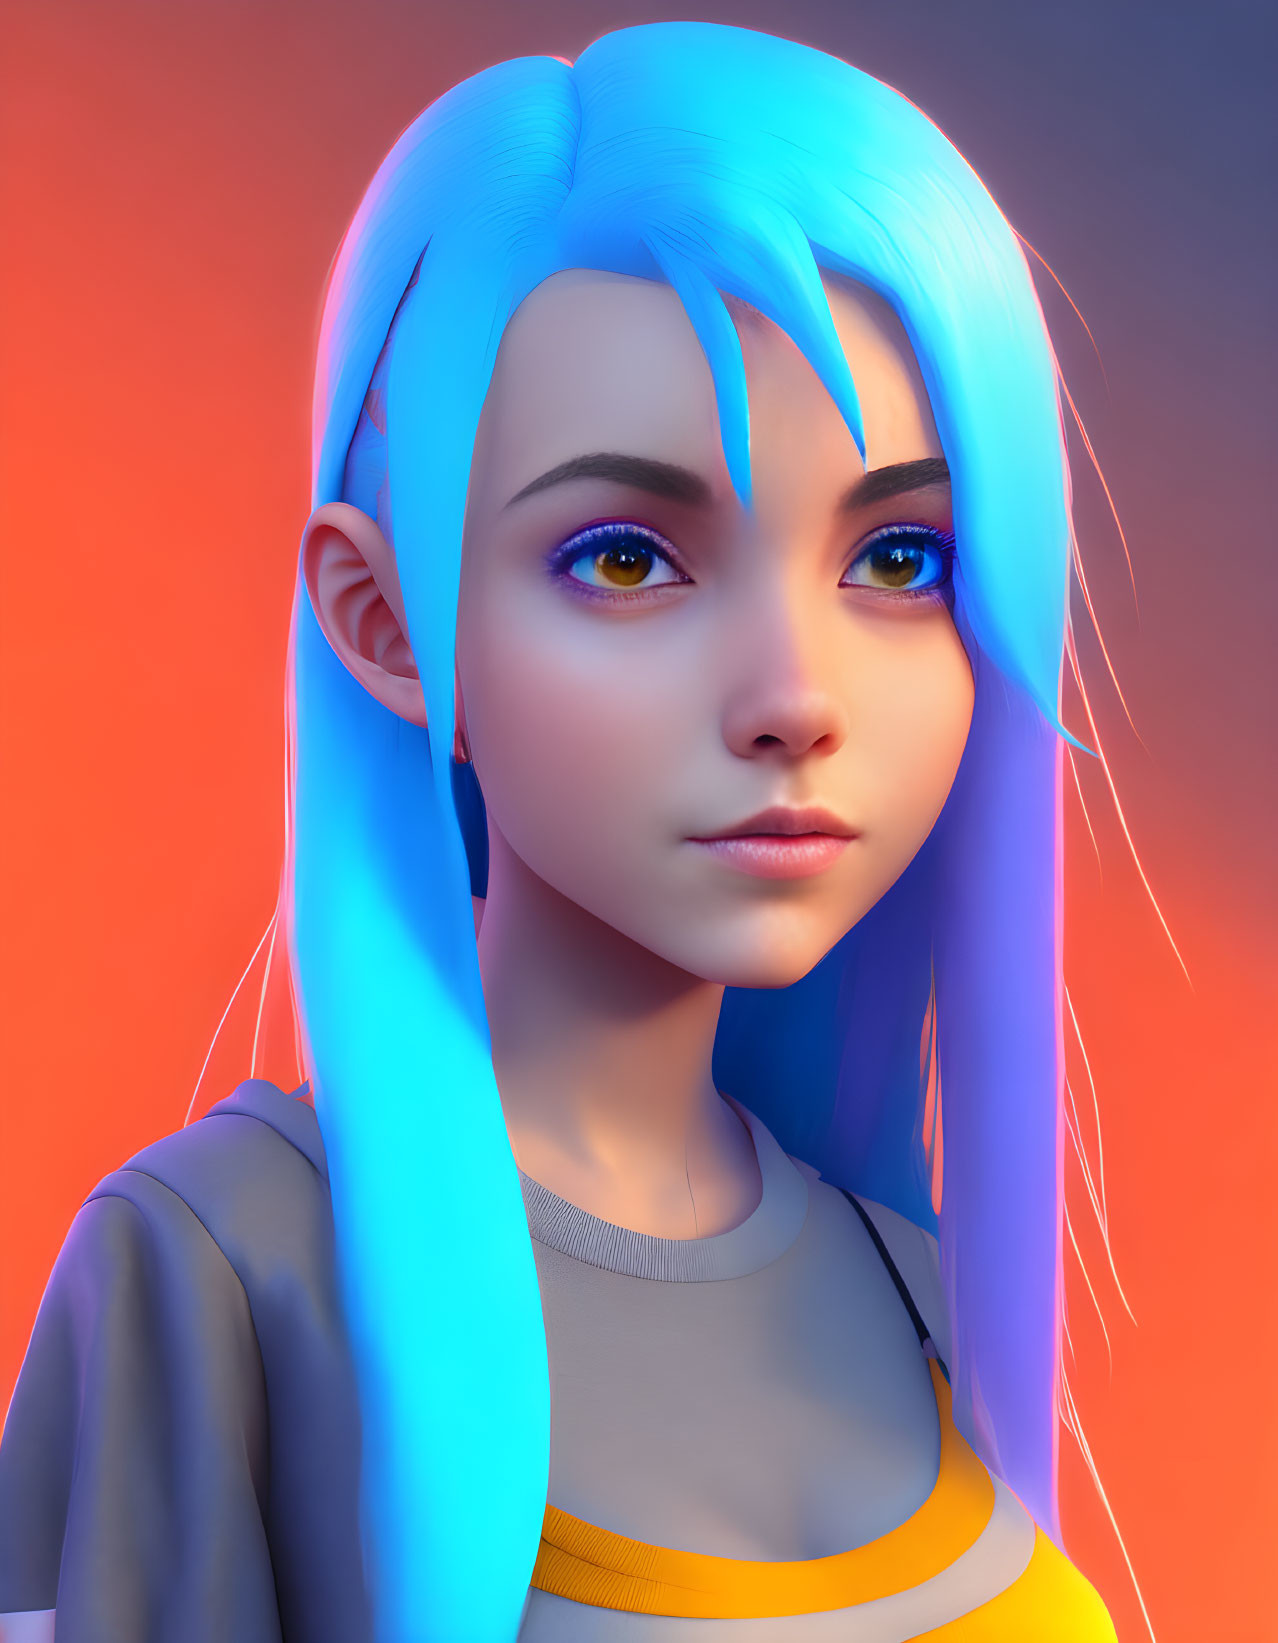 Digital artwork featuring young woman with blue hair, eyes, and pointed ears on gradient backdrop